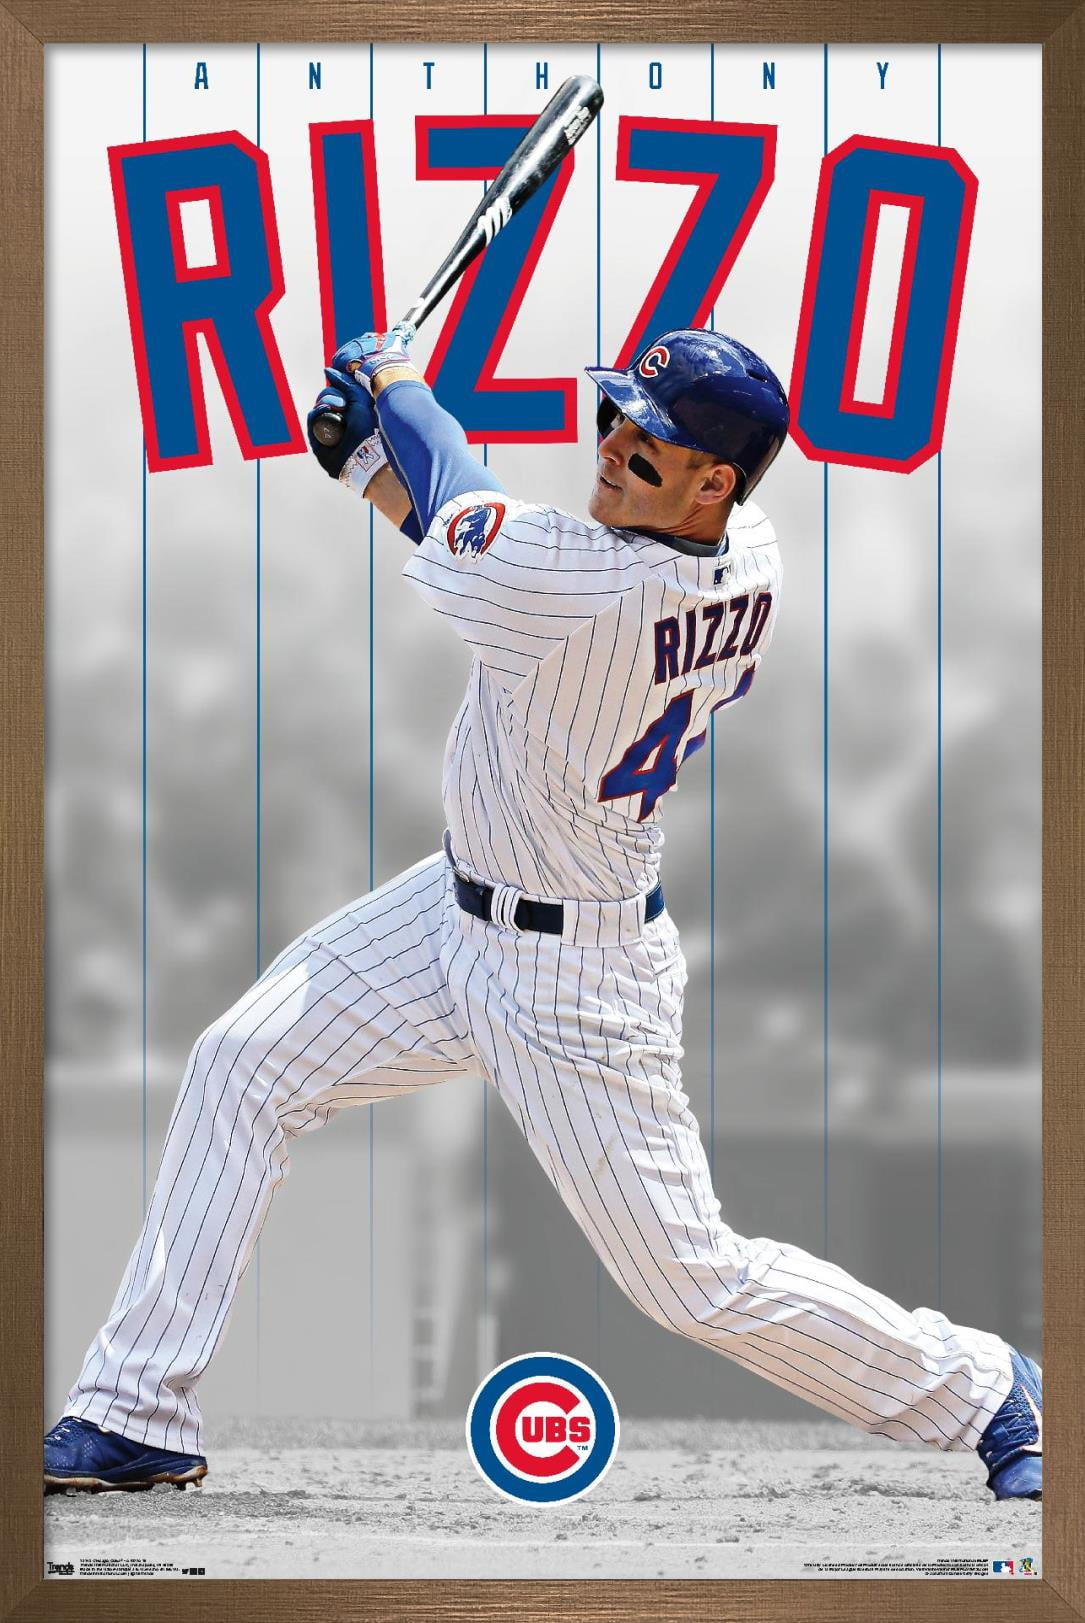 MLB Chicago Cubs - Anthony Rizzo 16 Wall Poster, 22.375 x 34, Framed 